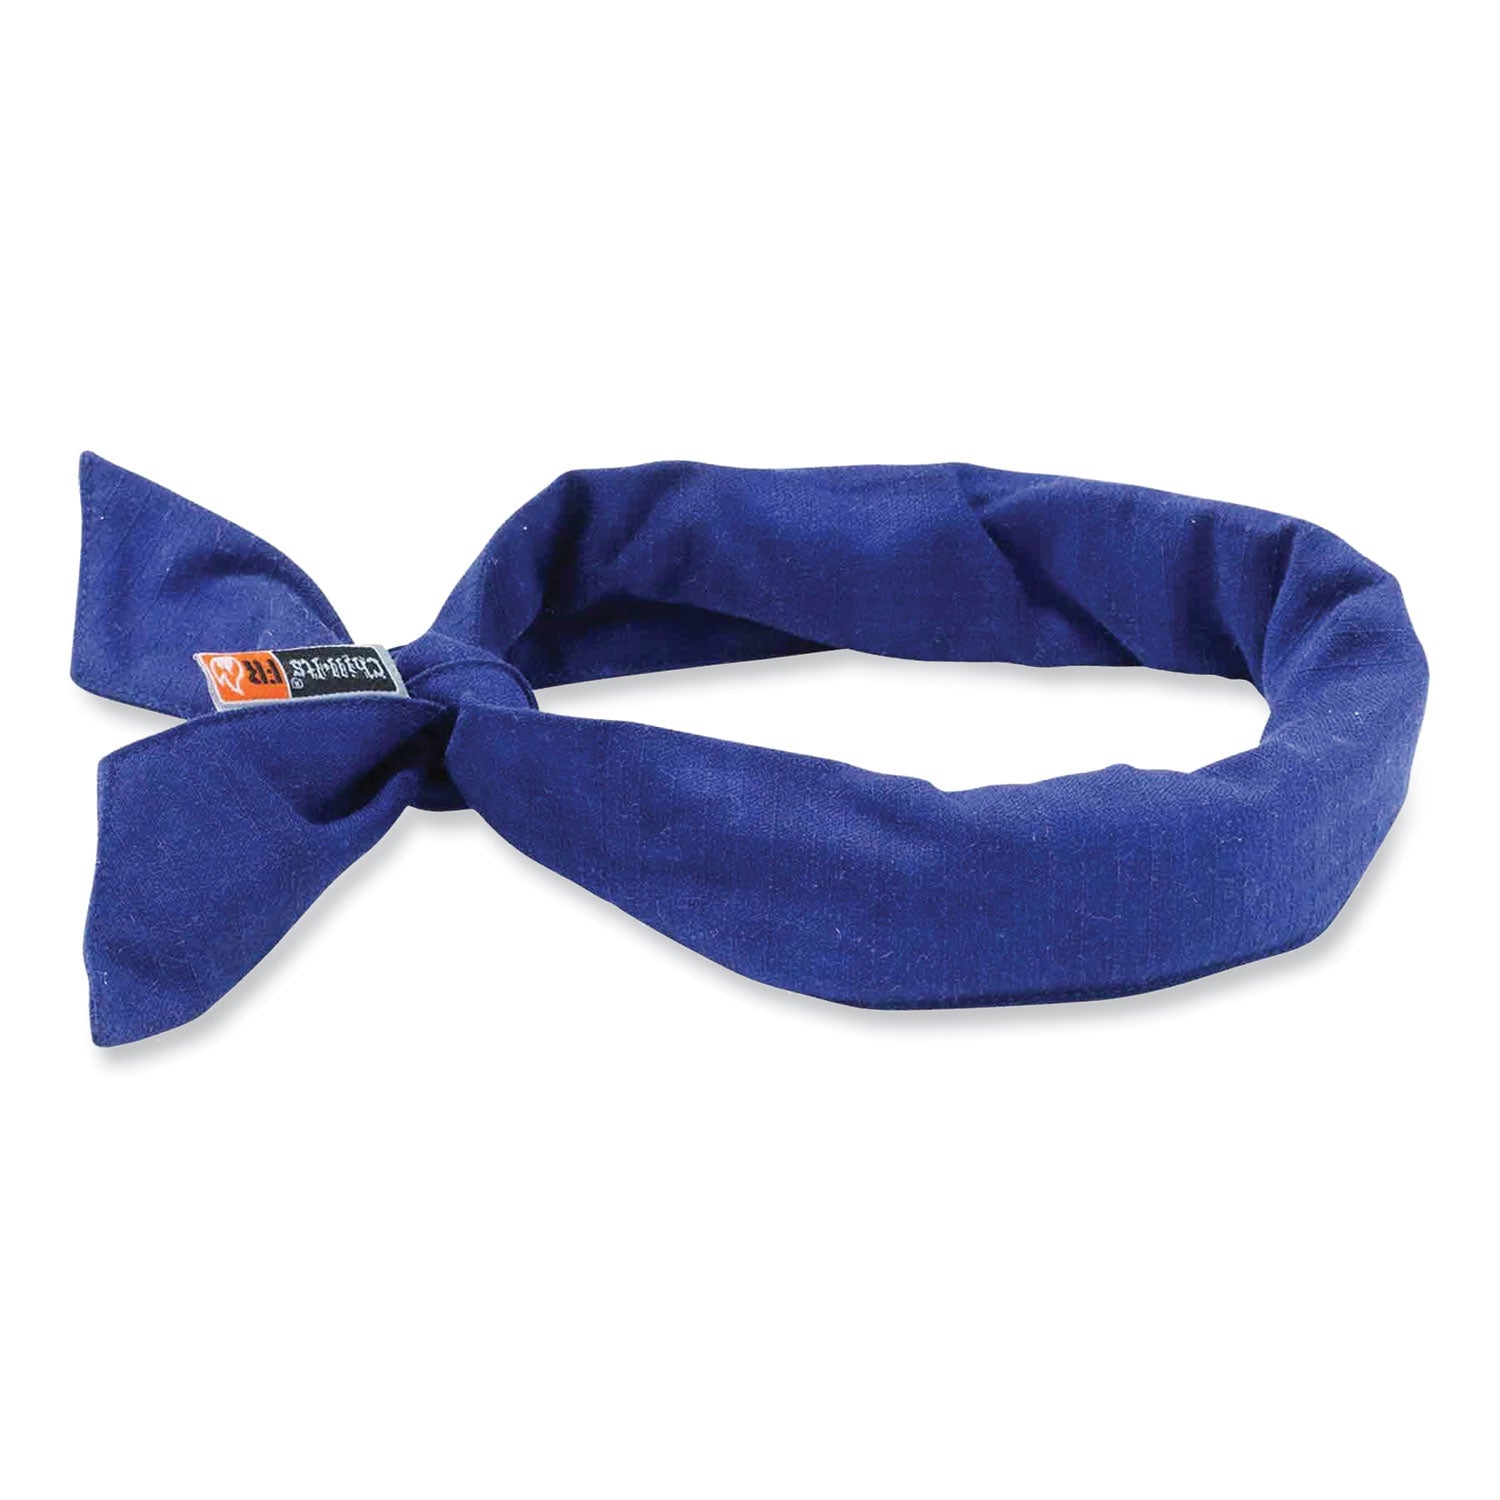 chill-its-6700fr-fire-resistant-cooling-tie-bandana-headband-one-size-fits-most-blue-ships-in-1-3-business-days_ego12607 - 2